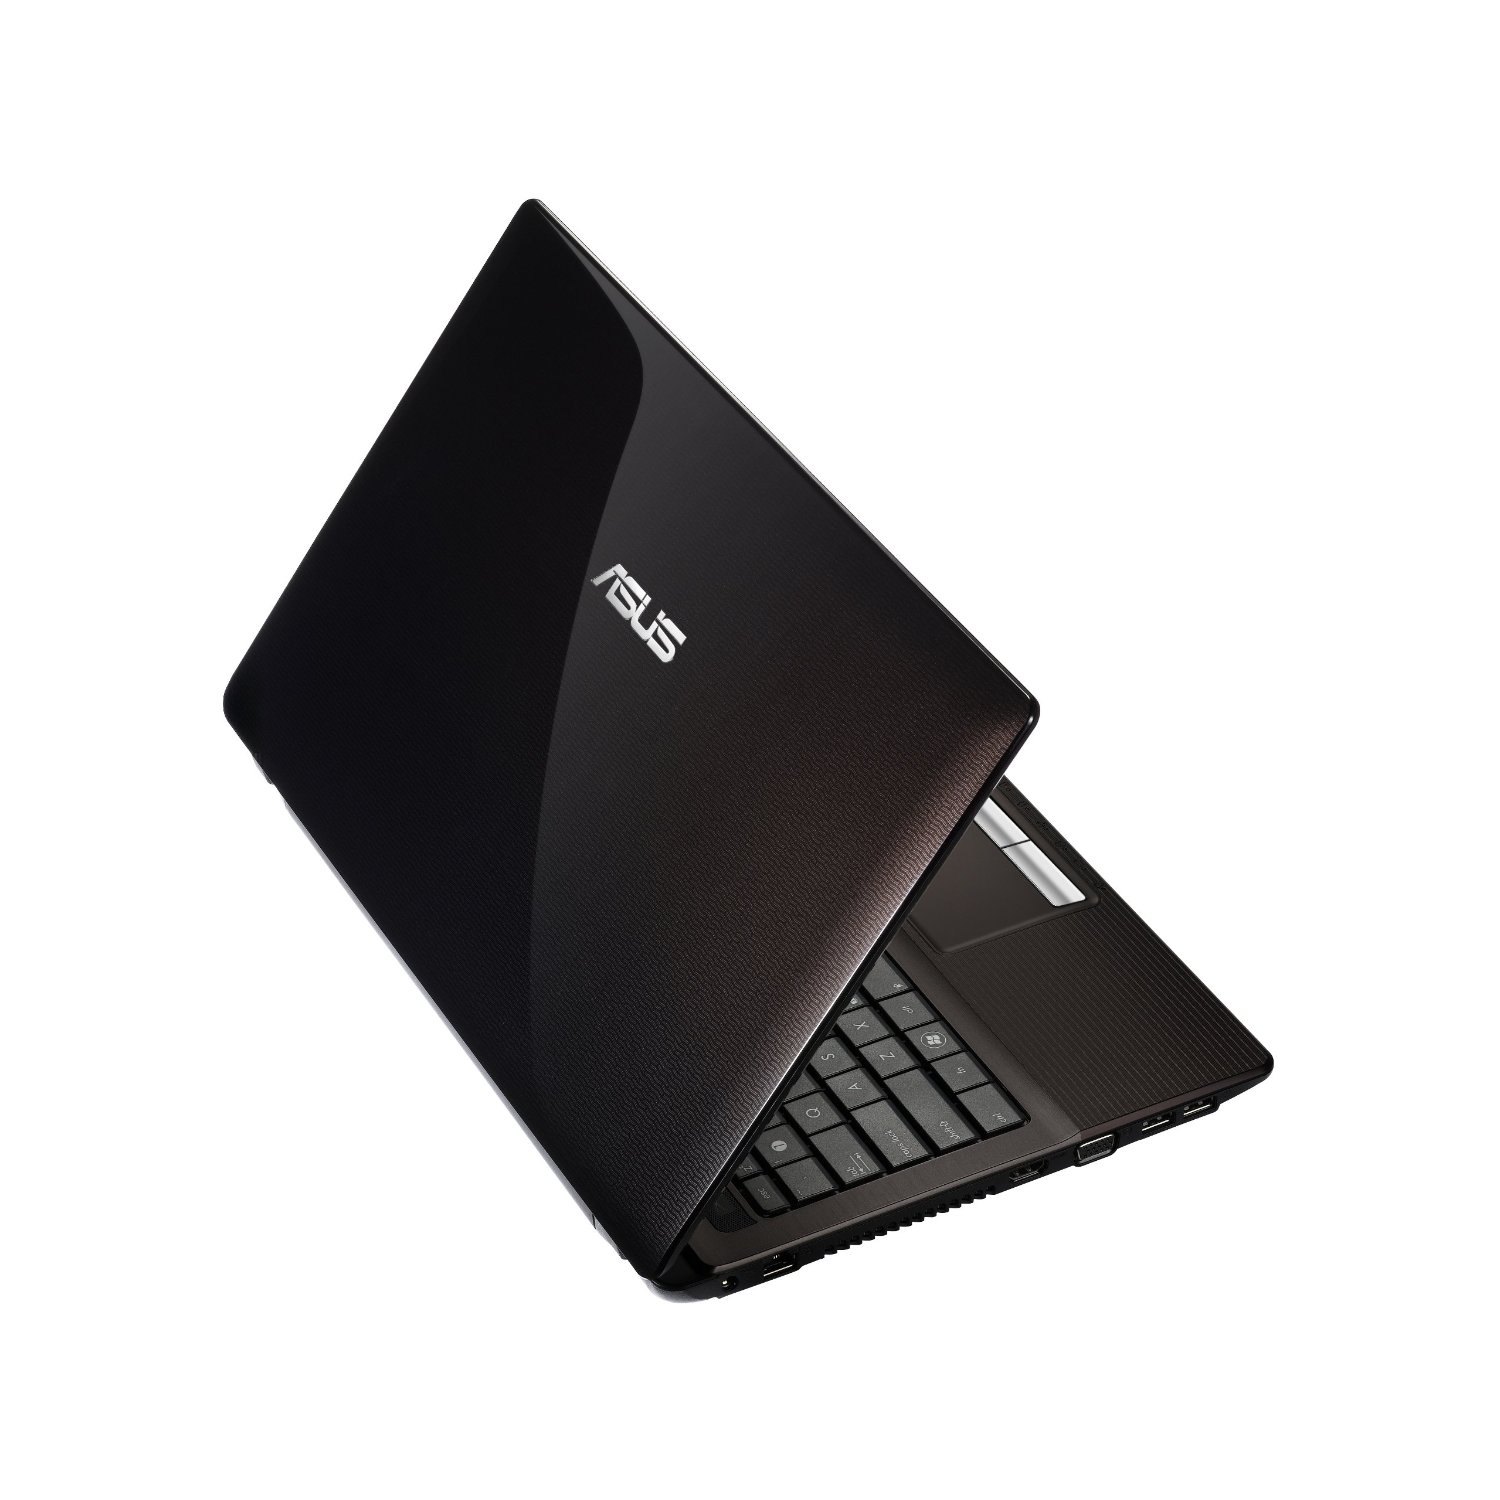 http://thetechjournal.com/wp-content/uploads/images/1202/1329721072-asus-a53ues21-156inch-laptop-6.jpg